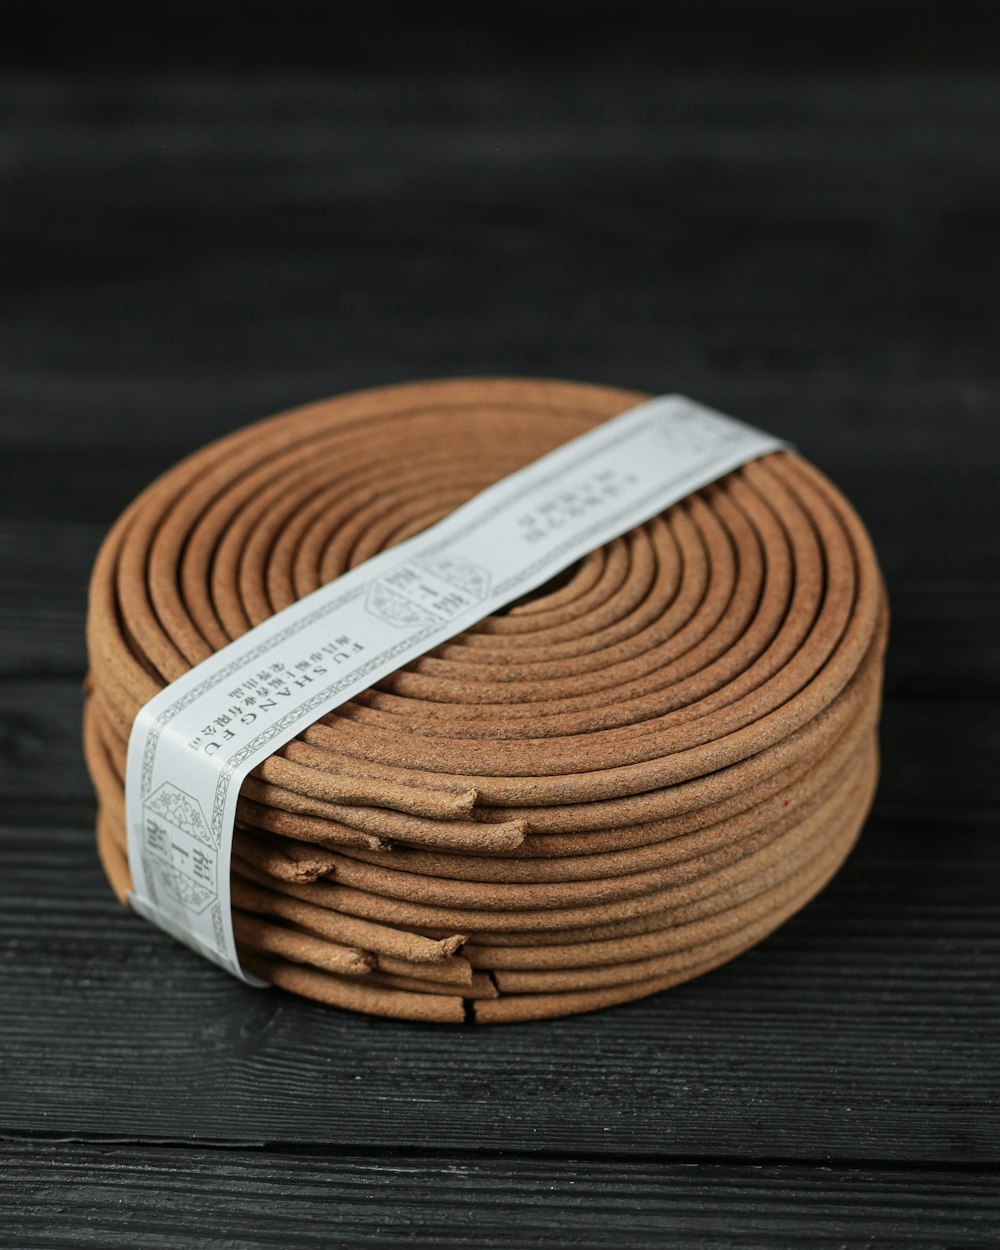 a roll of leather cord on a wooden surface